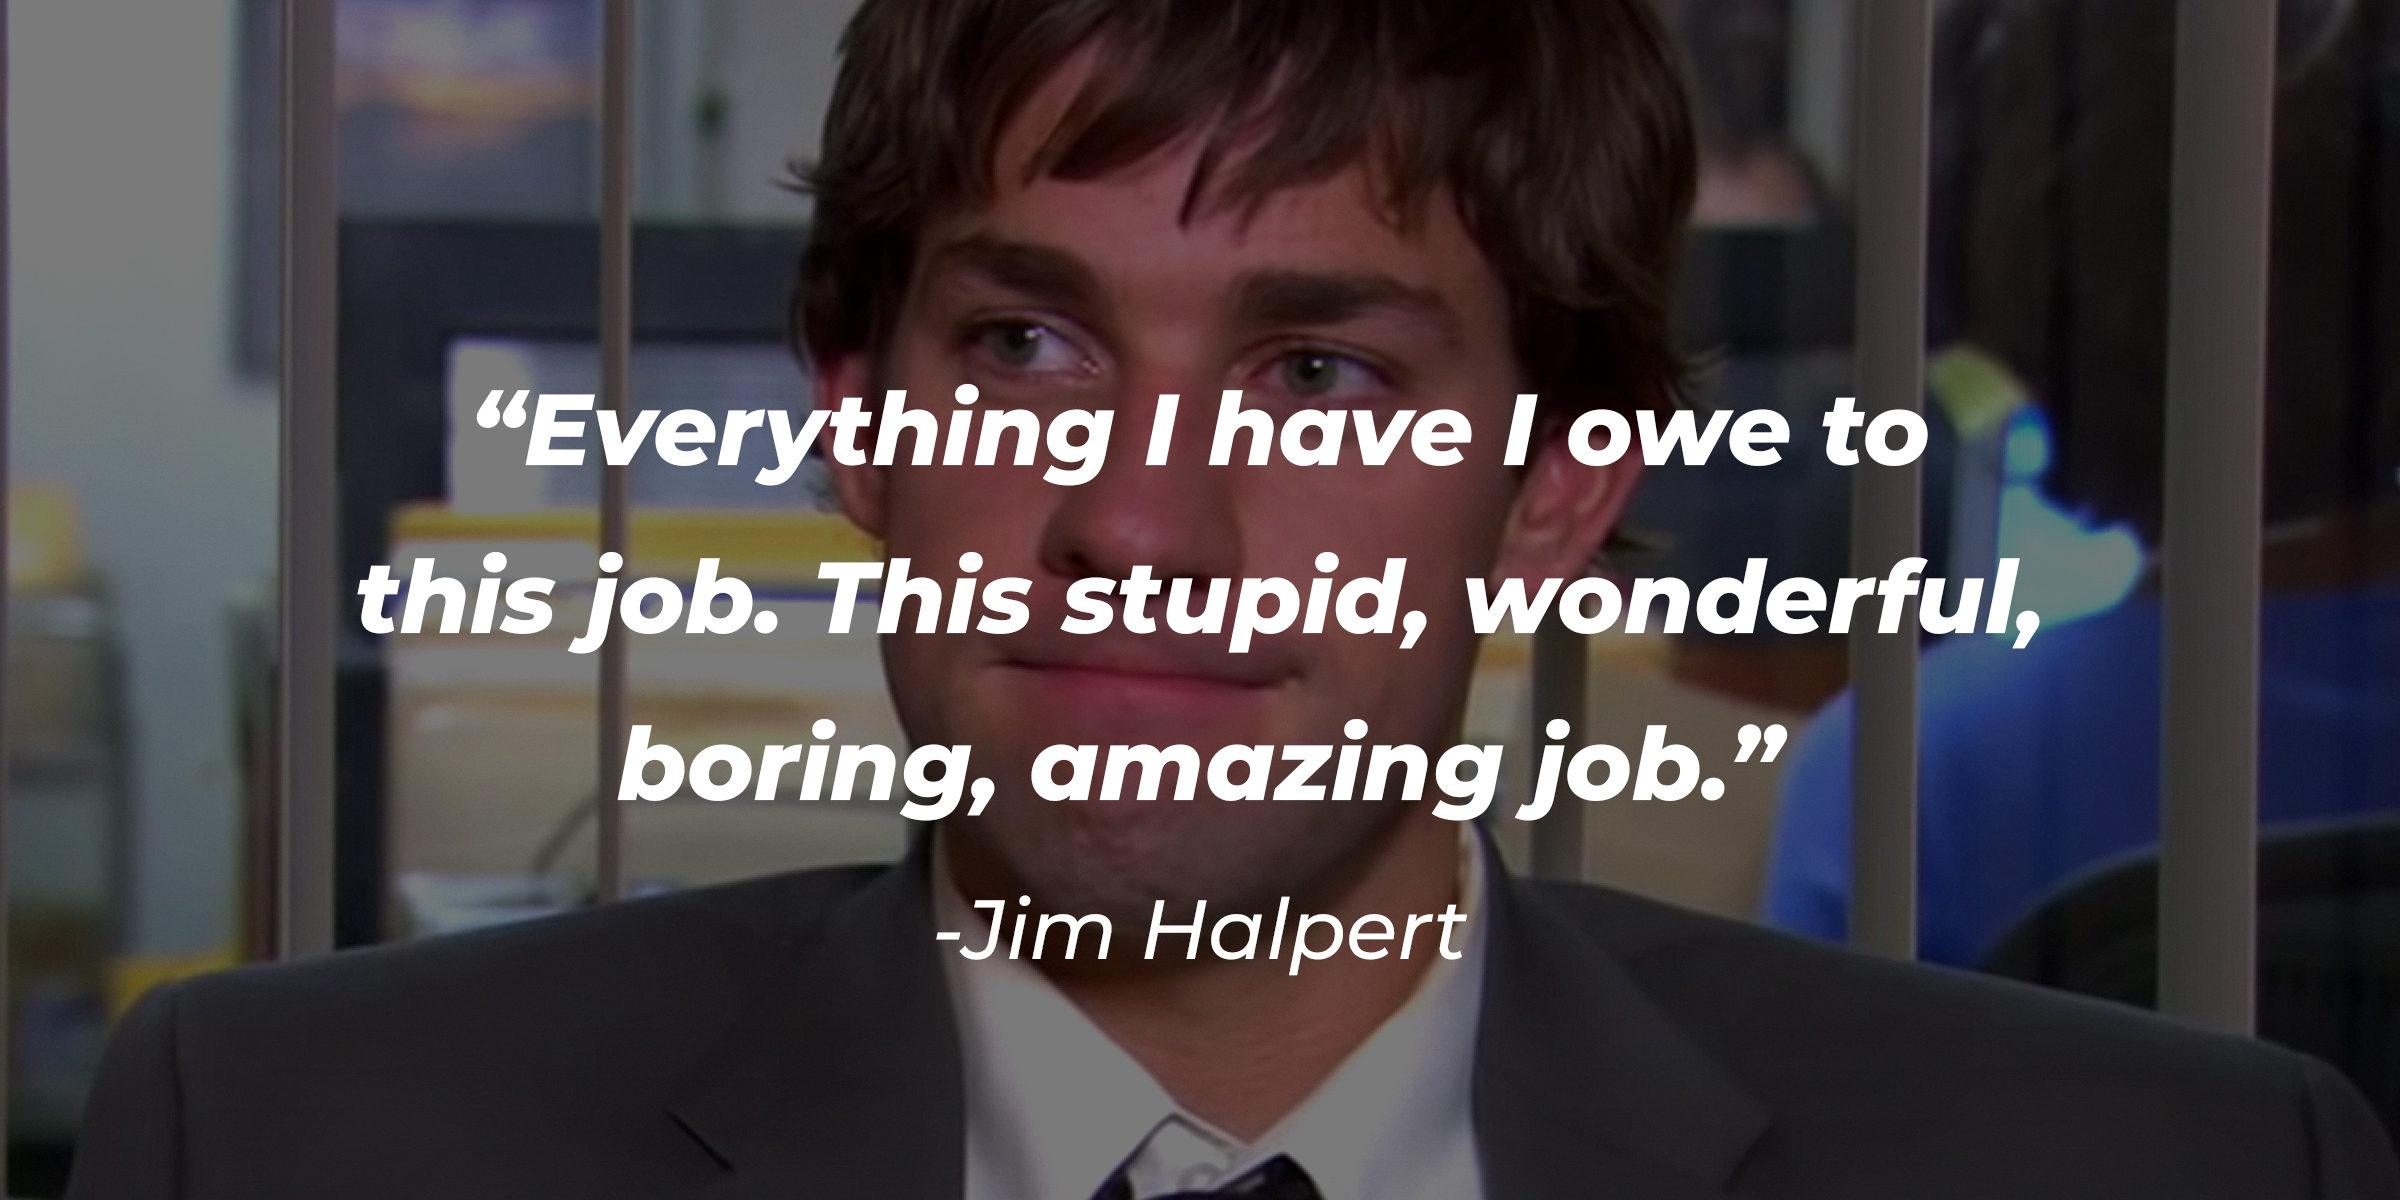 An image of Jim Halpert with his quote: “Everything I have I owe to this job. This stupid, wonderful, boring, amazing job.” | Source: Youtube.com/TheOffice